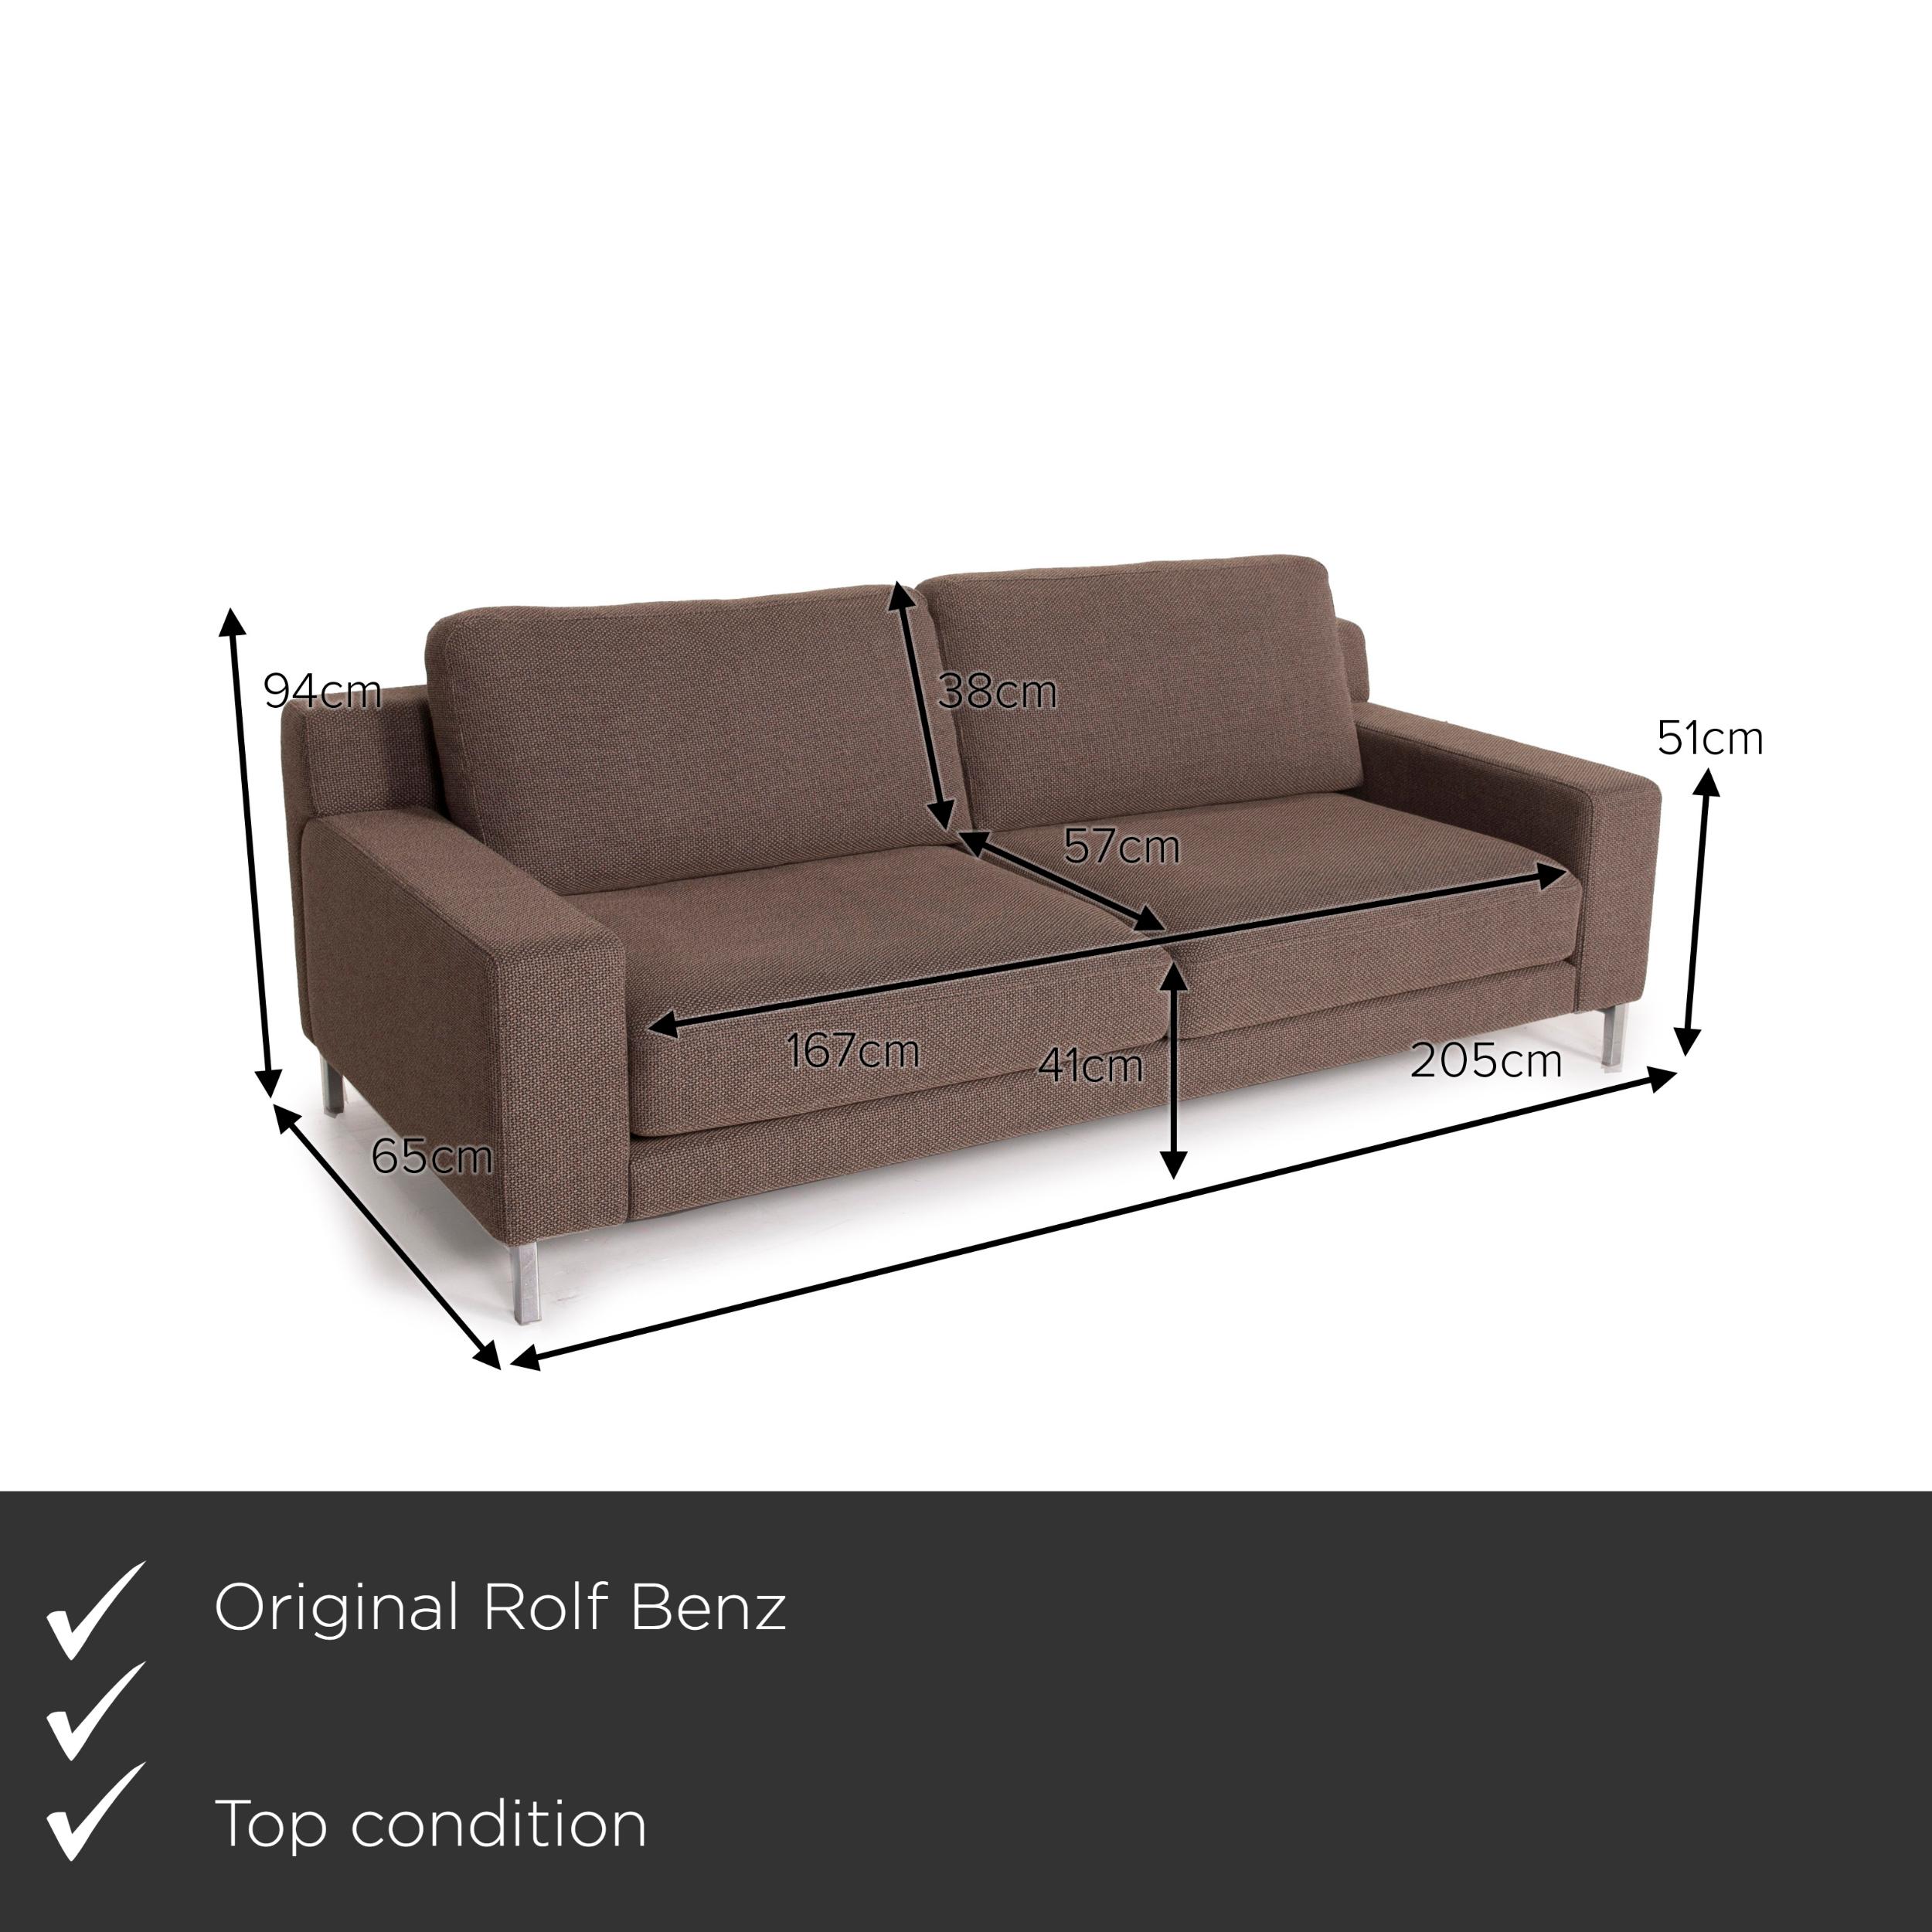 We present to you a Rolf Benz Ego fabric sofa brown two-seater.
 

 Product measurements in centimeters:
 

Depth: 94
Width: 205
Height: 65
Seat height: 41
Rest height: 51
Seat depth: 57
Seat width: 167
Back height: 38.
 